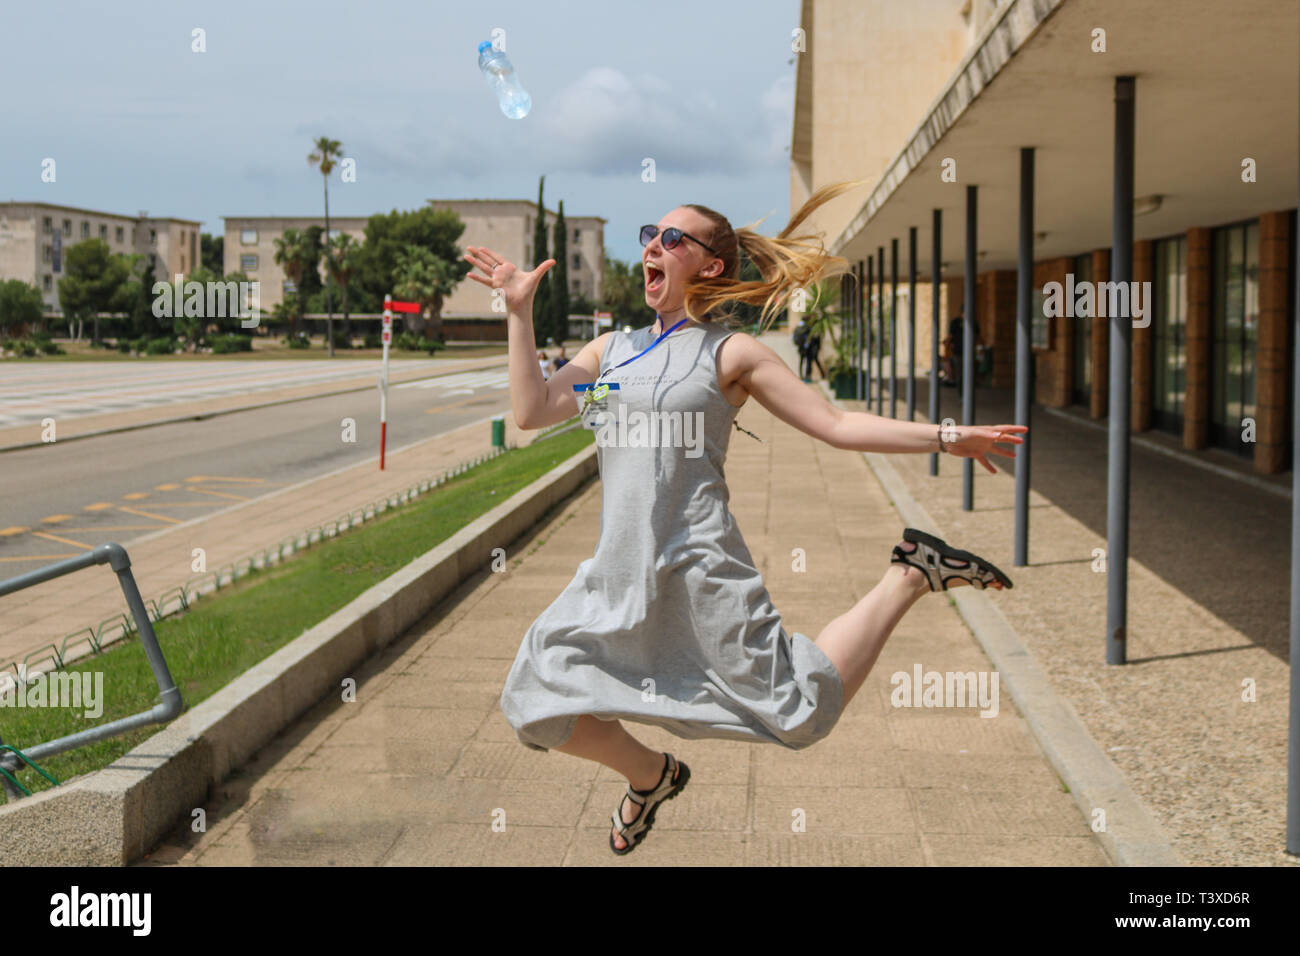 Blonde girl jumping, catching a water bottle Stock Photo